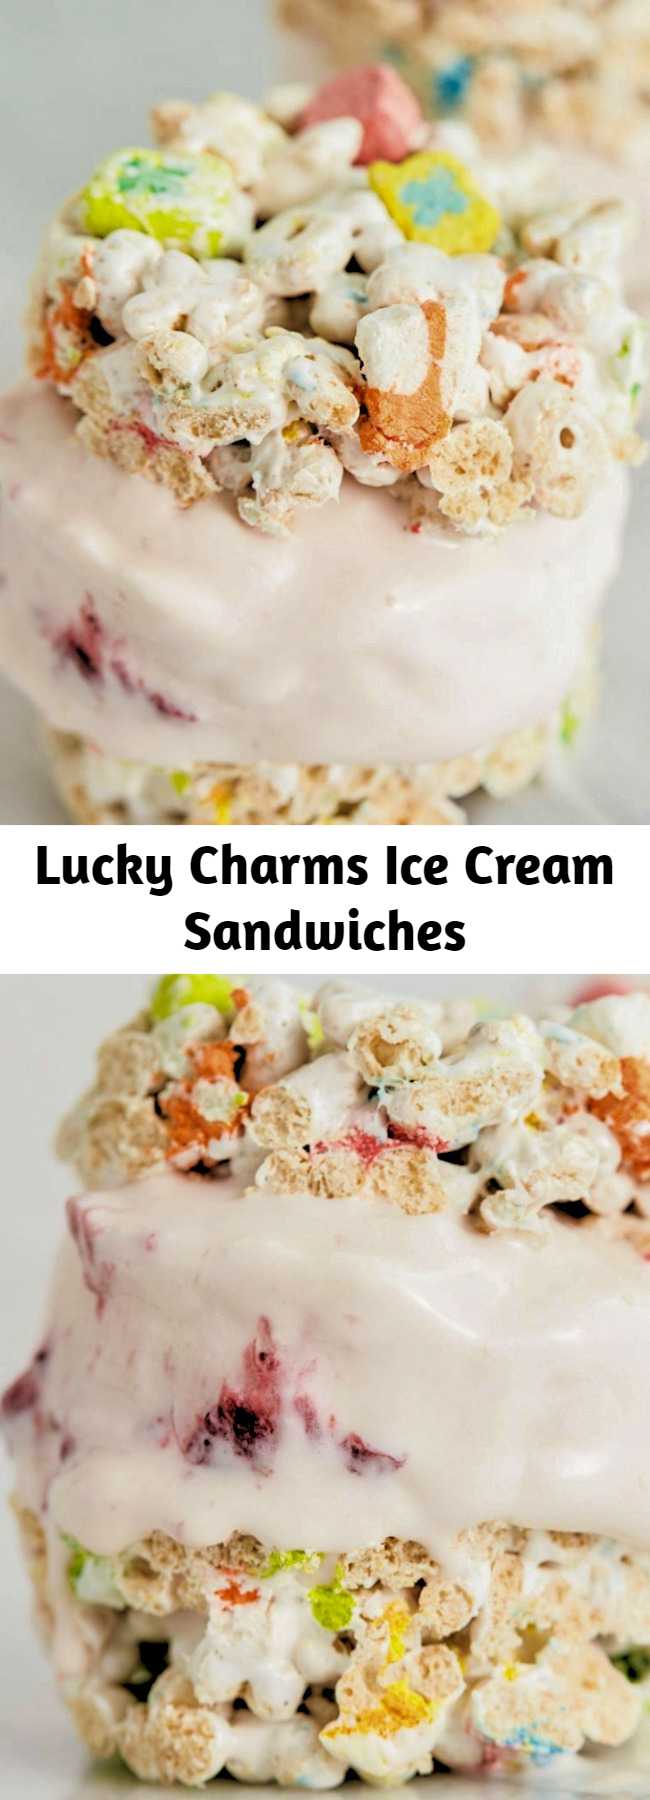 Lucky Charms Ice Cream Sandwiches - Looking for an amazing ice cream sandwich recipe? These Lucky Charms Ice Cream Sandwiches is the best!